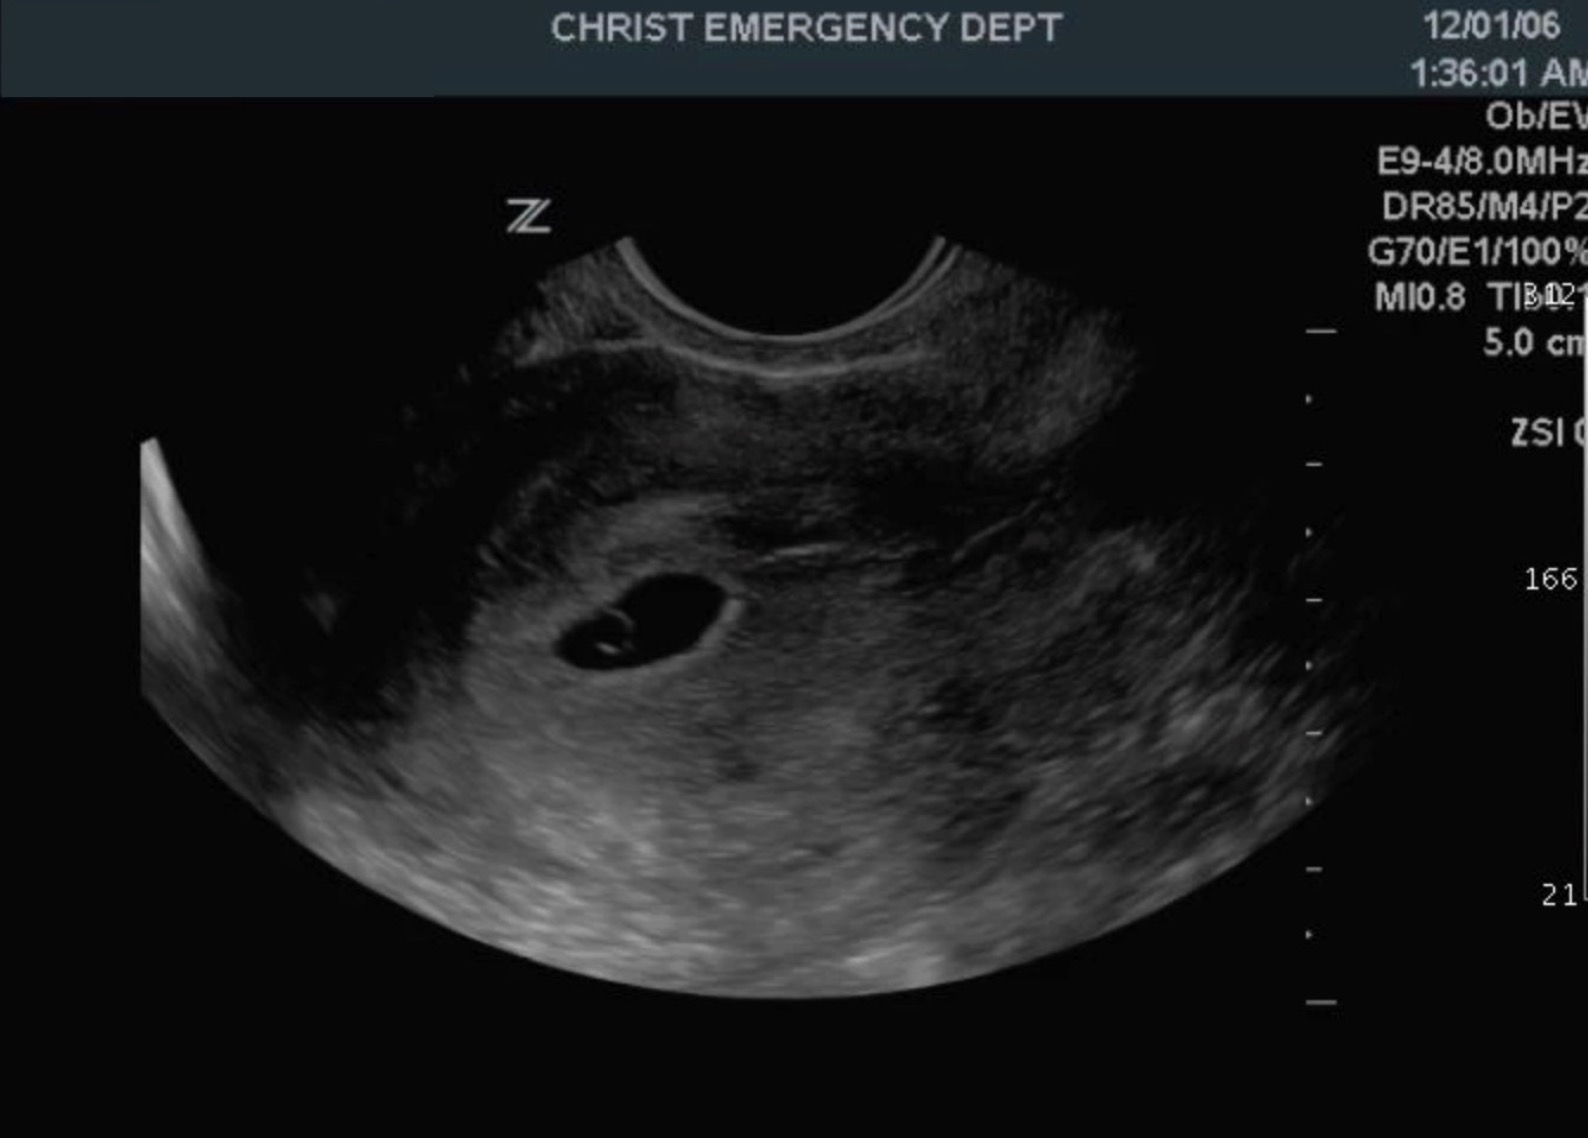 <p>A Retroverted Uterus With Gestational Sac